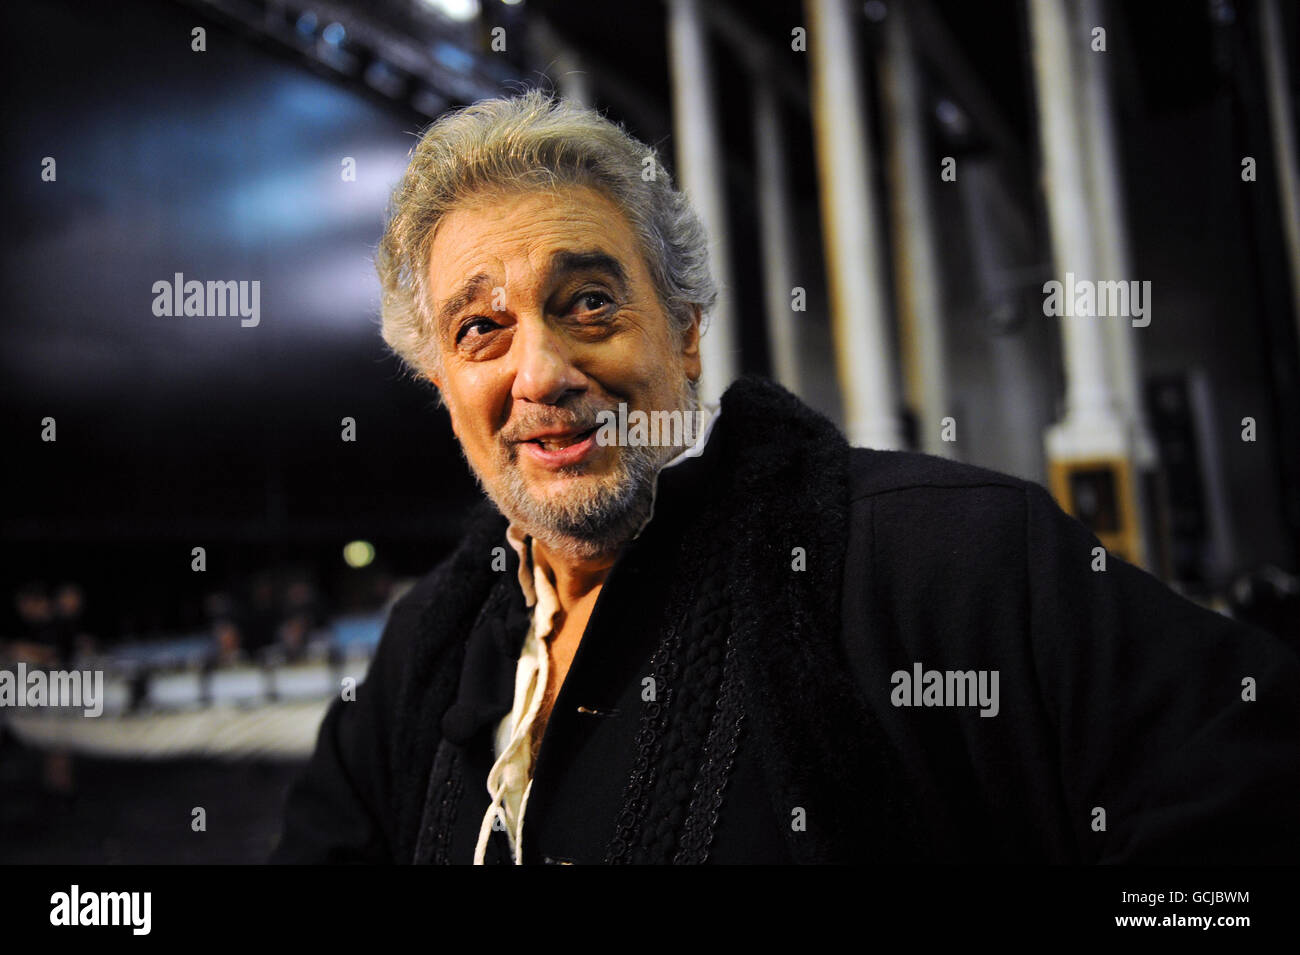 Placido Domingo backstage after performing in Verdi's Simon Boccanegra at the Royal Opera House in London - his 225th performance at the famous venue. The Spanish tenor sung in barritone, as demanded by the role. Stock Photo